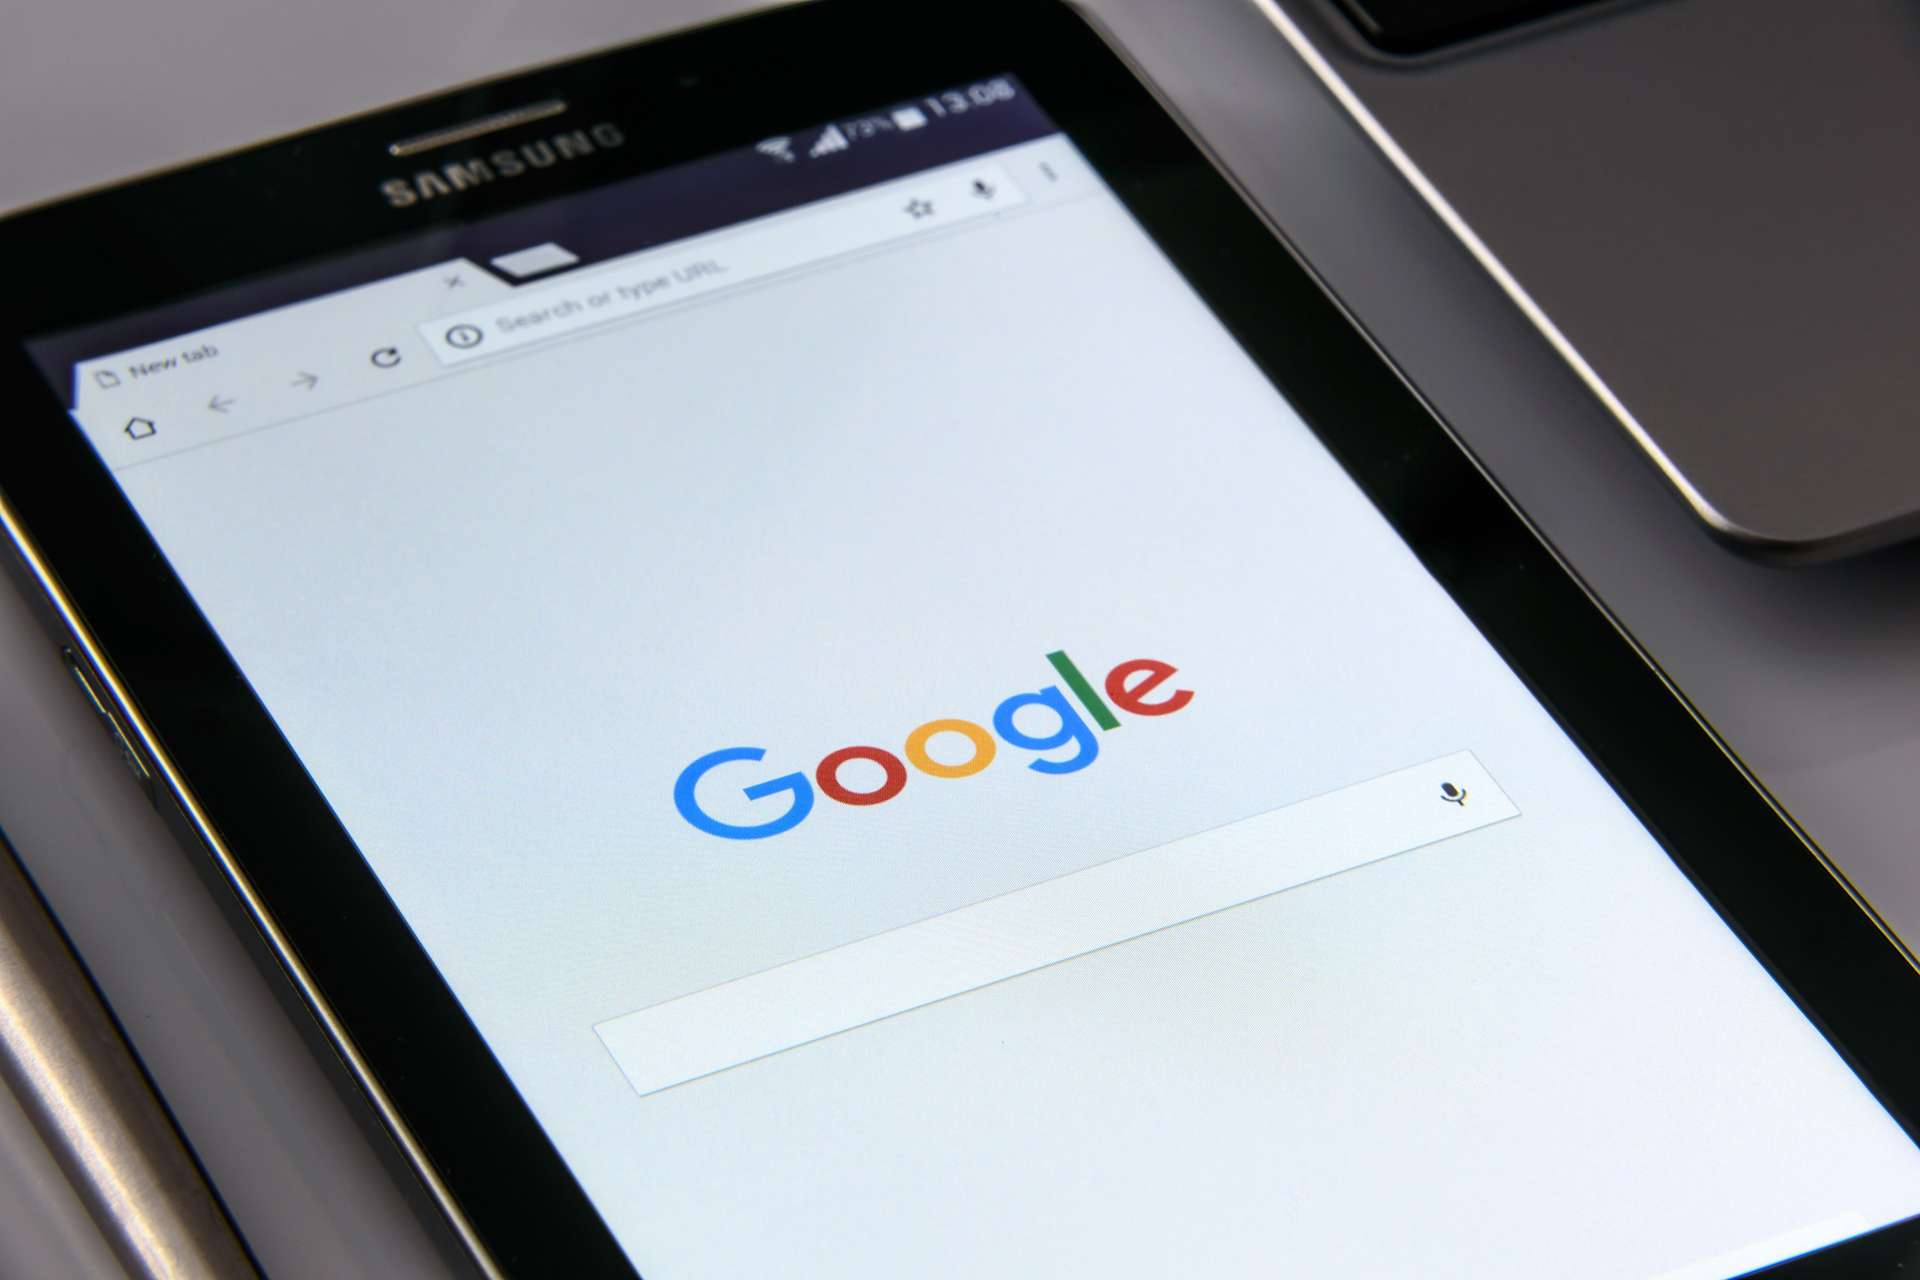 Google is the most powerful search engine on the Internet